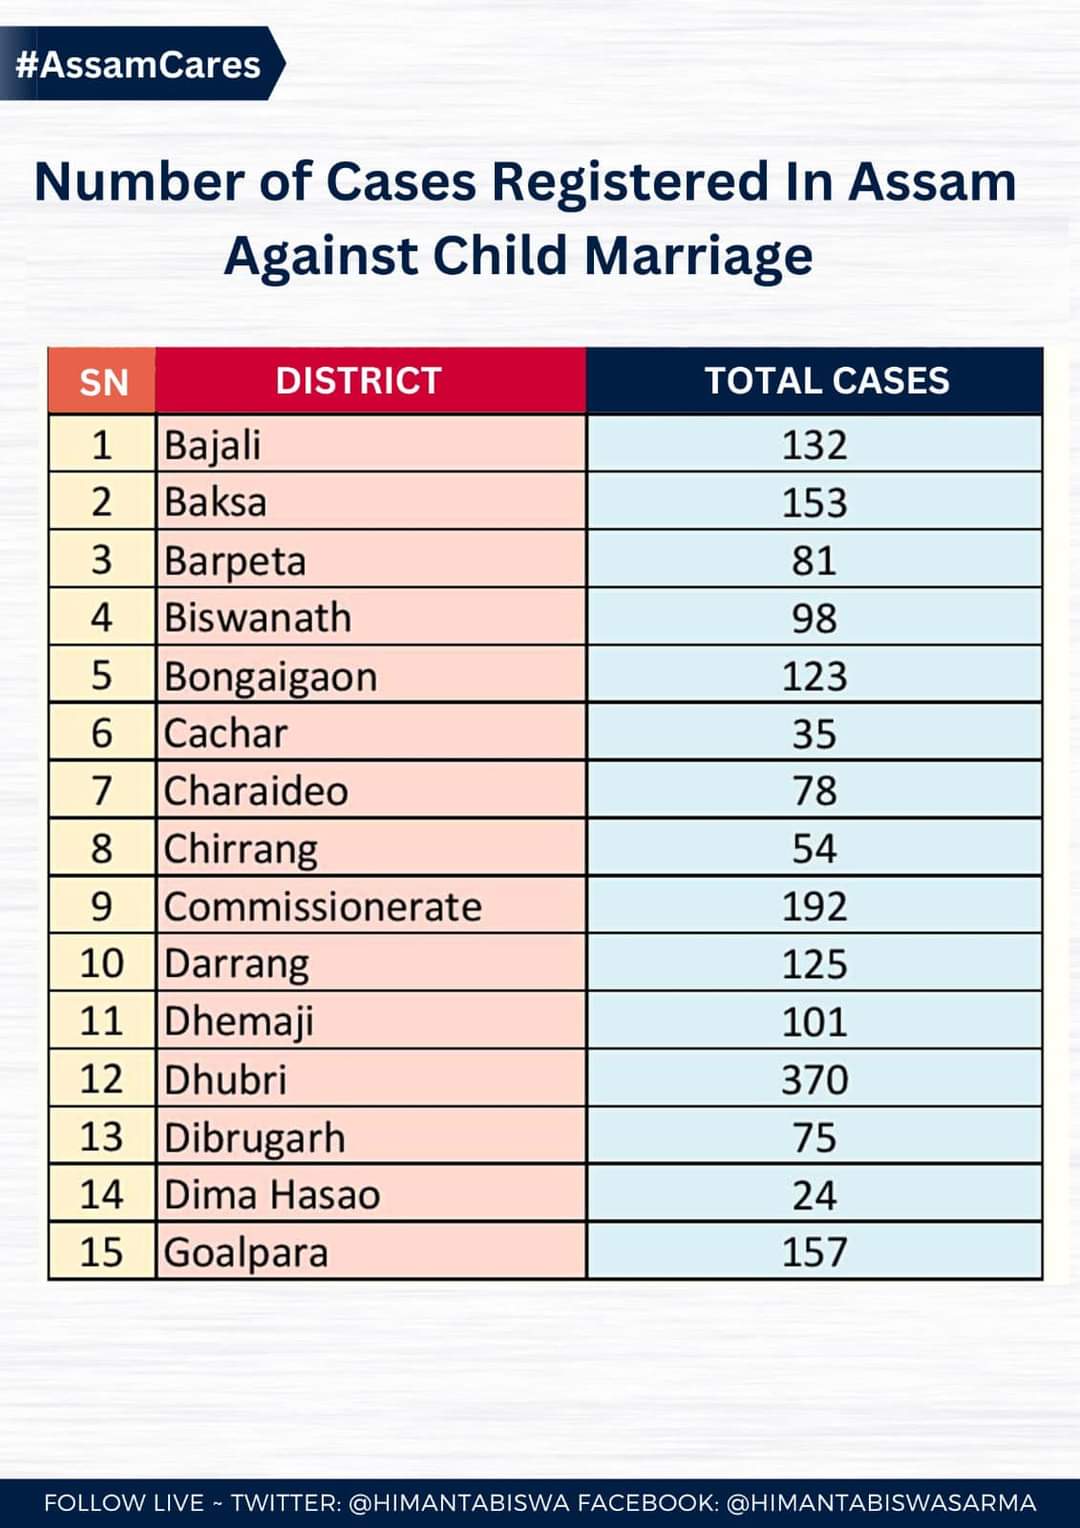 Child marriage cases in Assam